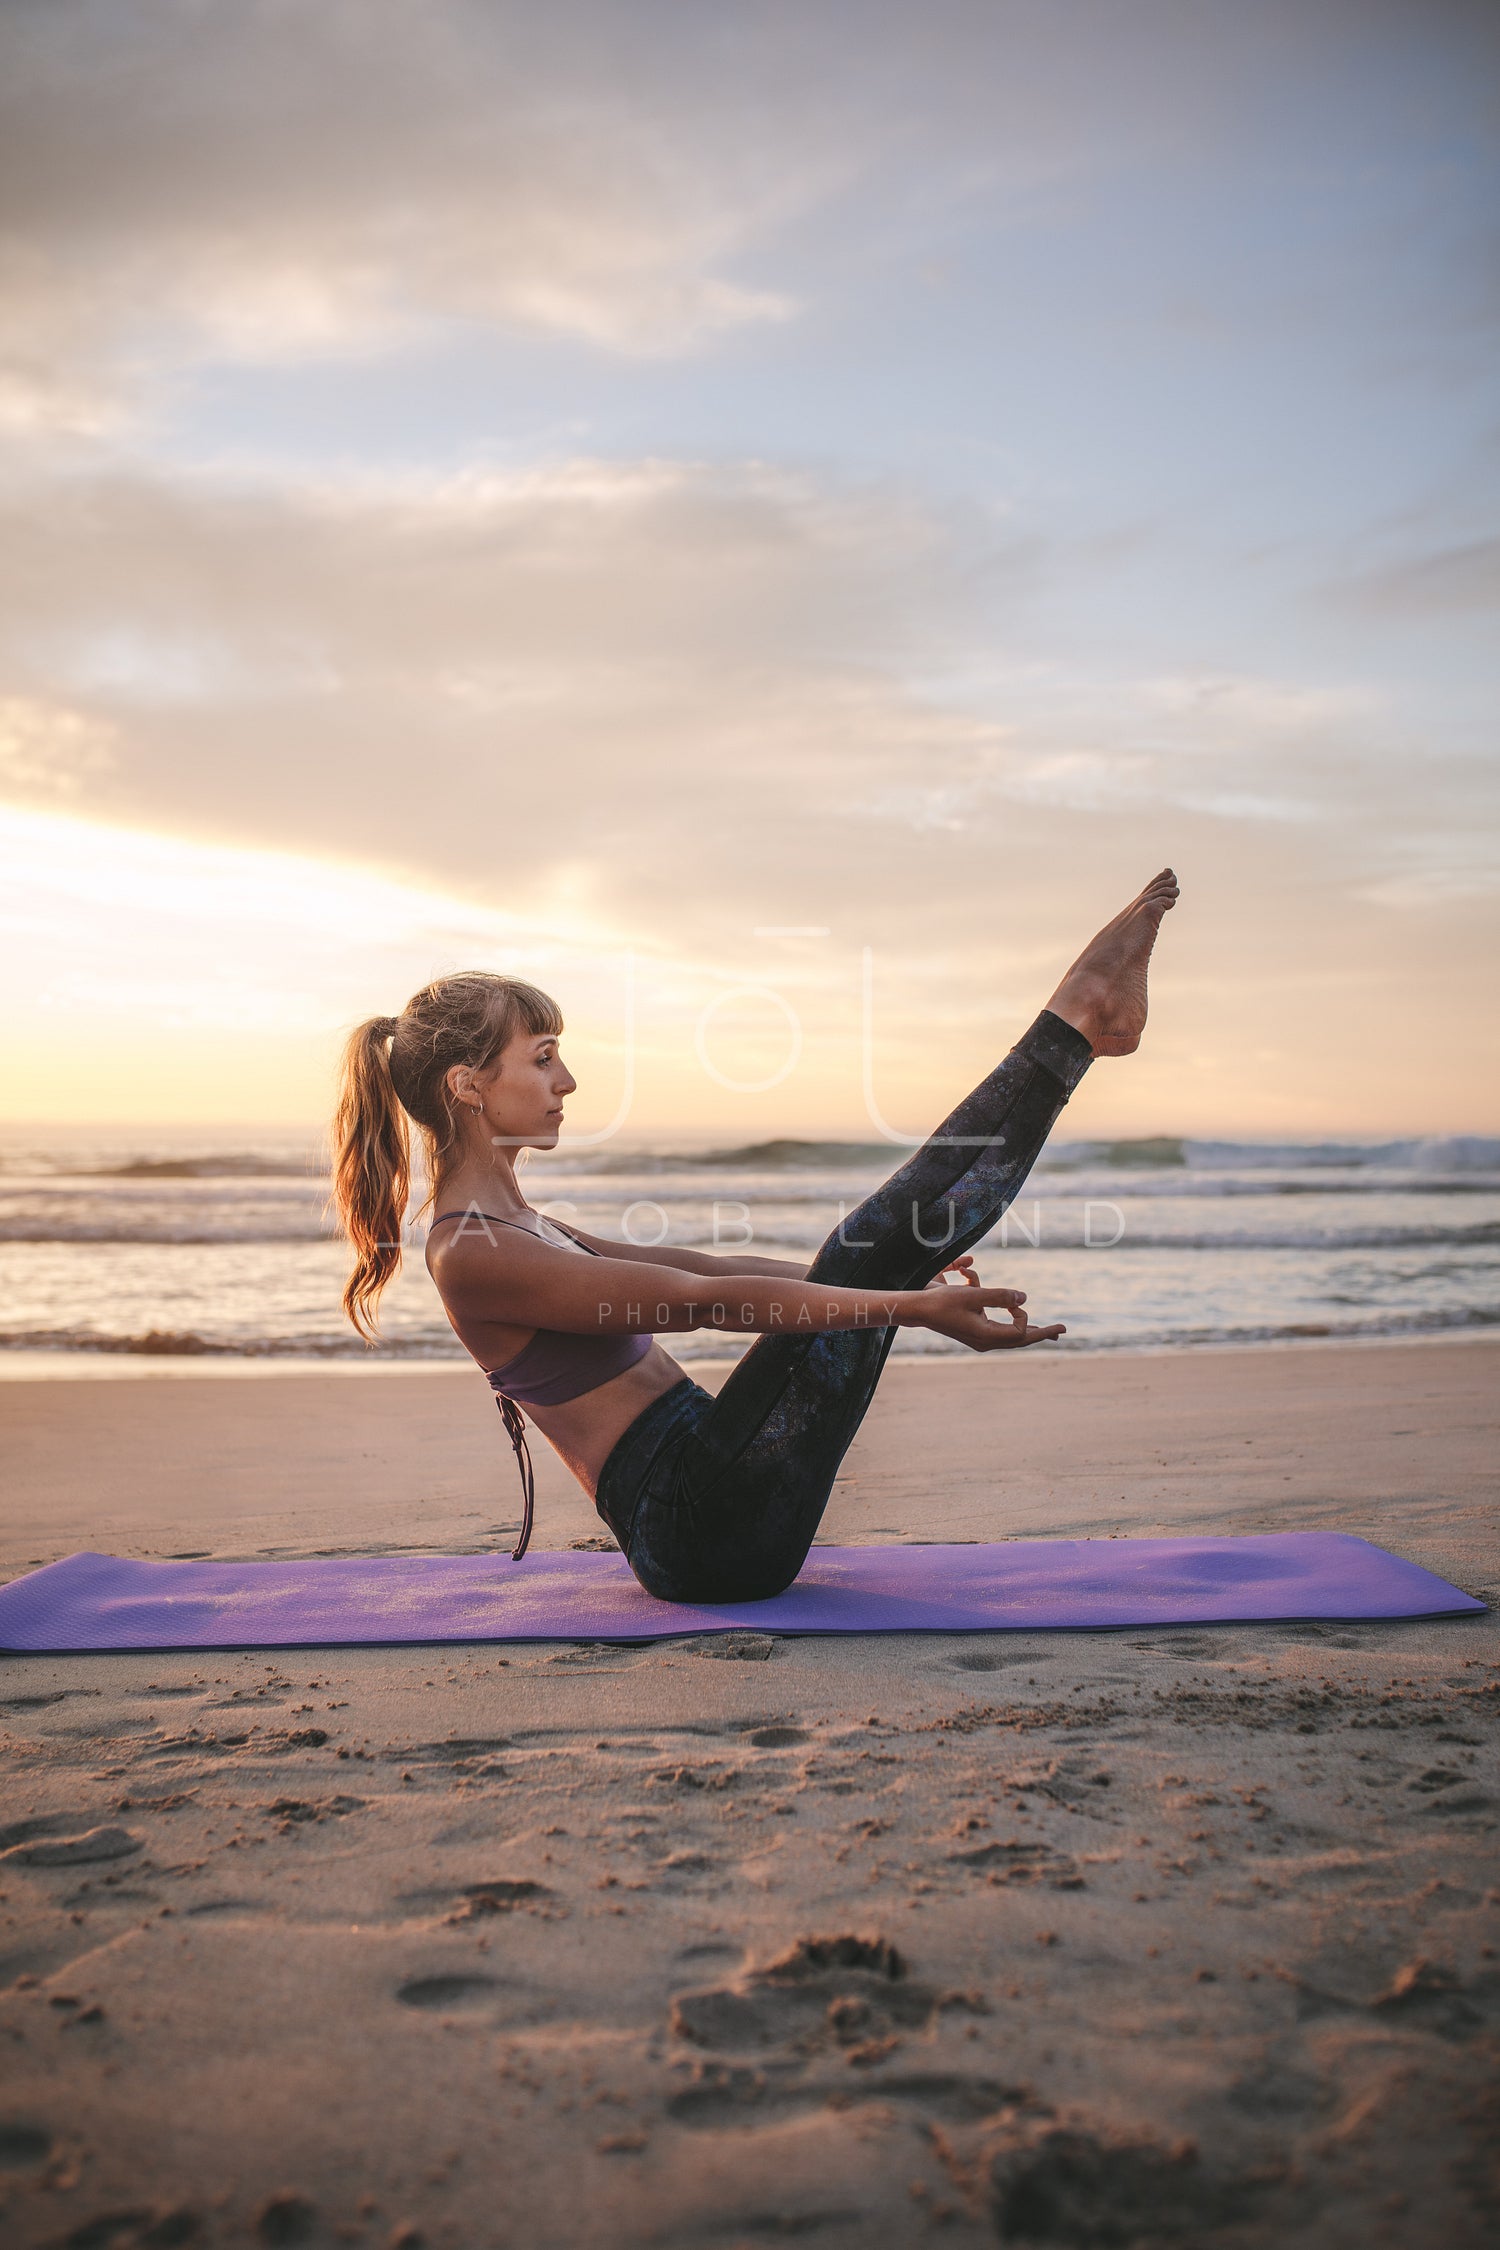 Silhouette Of Woman Standing At Yoga Pose On The Beach During An Amazing  Sunset. Stock Photo, Picture and Royalty Free Image. Image 37897101.